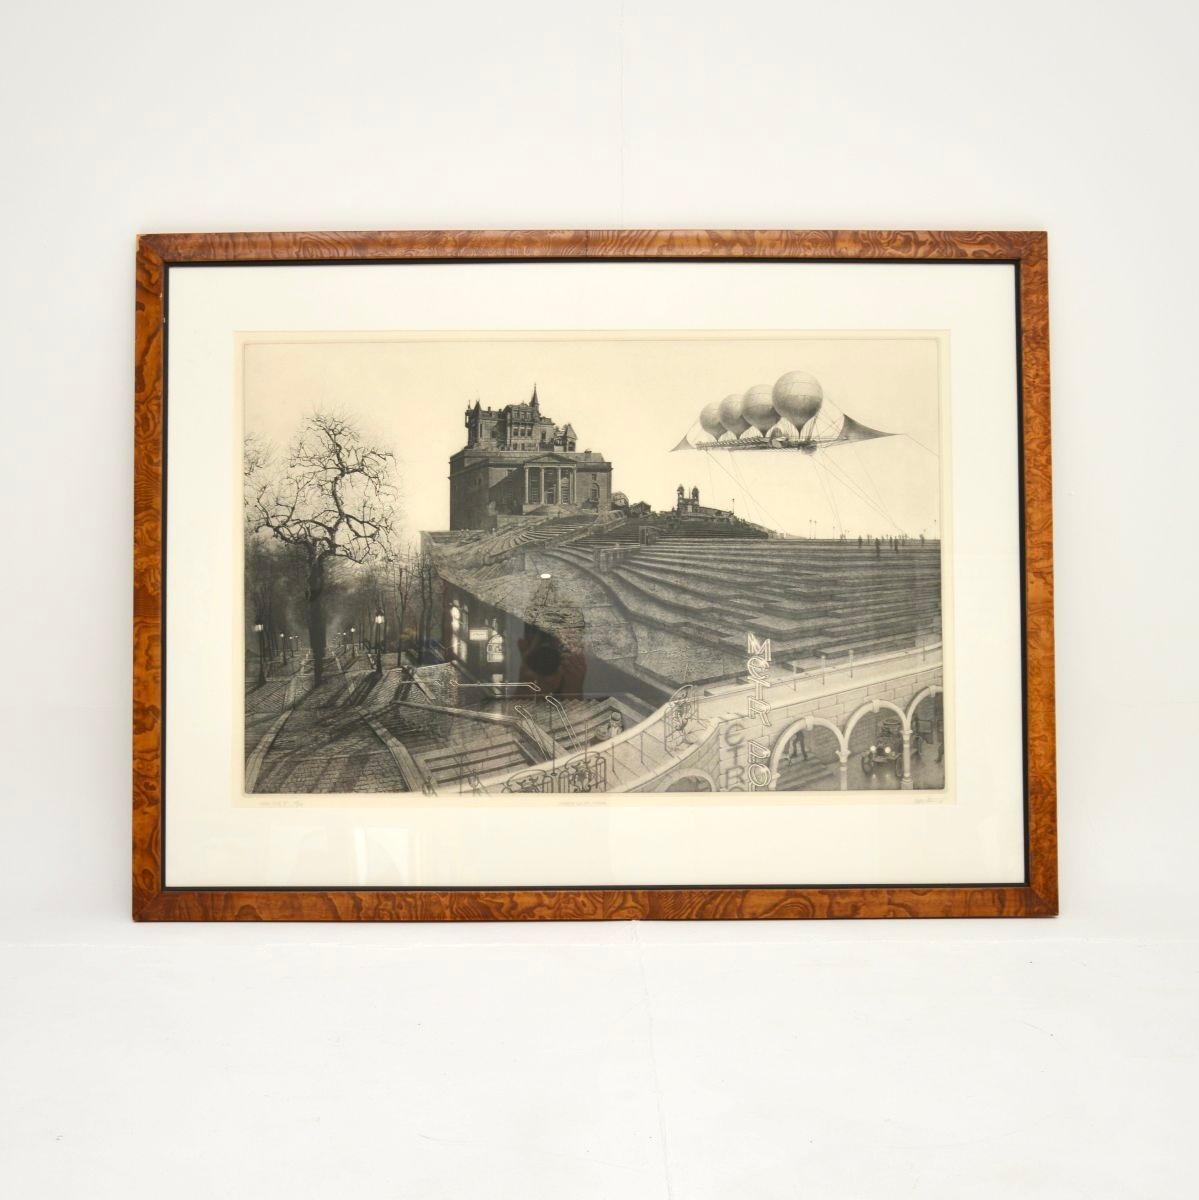 A fantastic etching by Peter Milton – Embarkation for Cythera.

This is in superb condition and is beautifully mounted in a burr elm frame. Signed, dated and titled by the artist, numbered 48 / 140. It is dated 2005.

There is just some minor